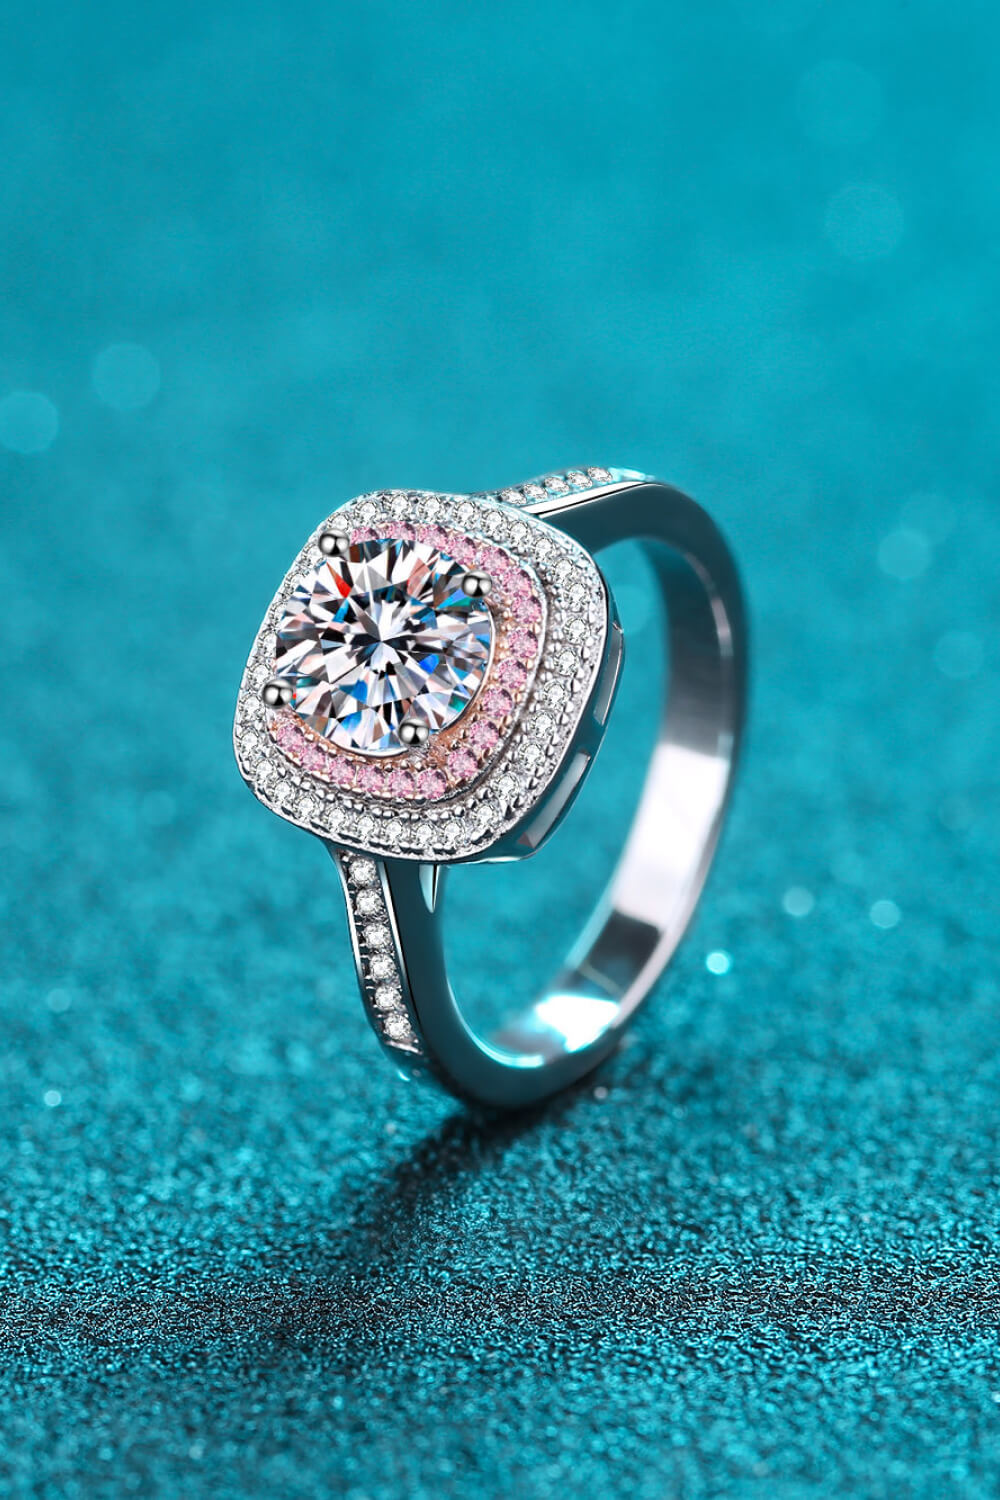 Need You Now Moissanite Ring - rings at TFC&H Co.